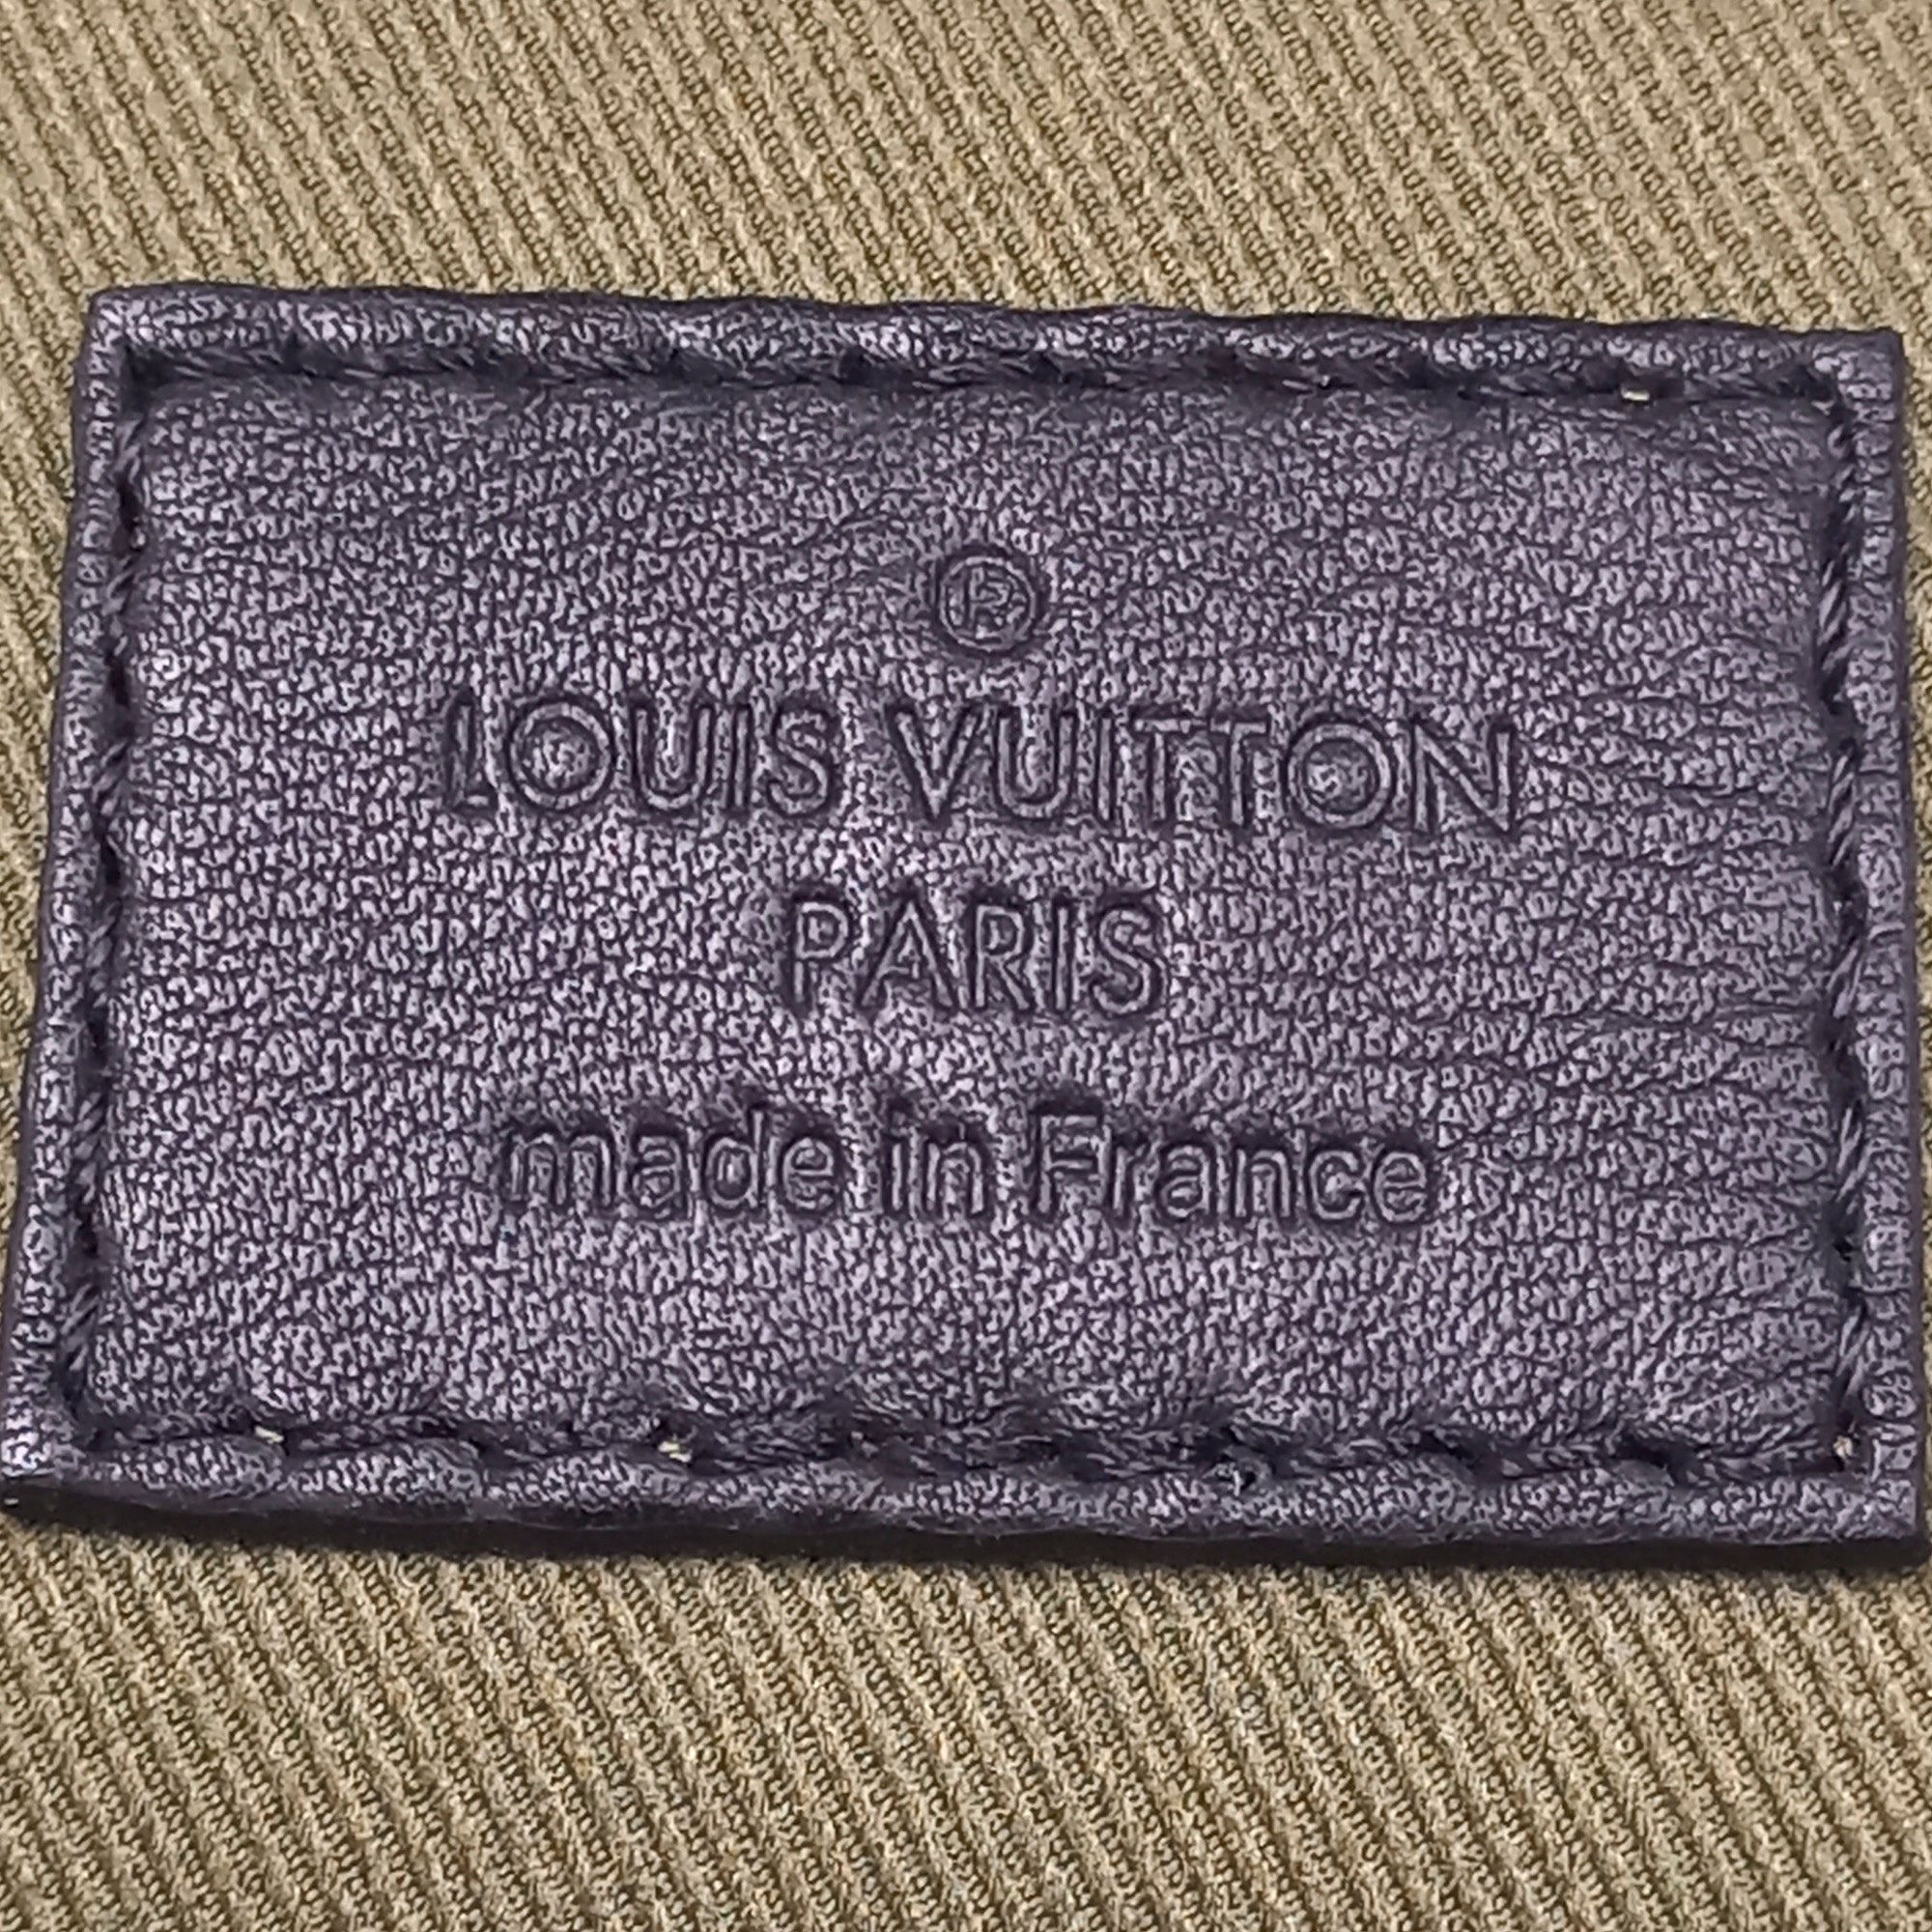 SOLD LV Palm Springs Infrarouge PM Backpack